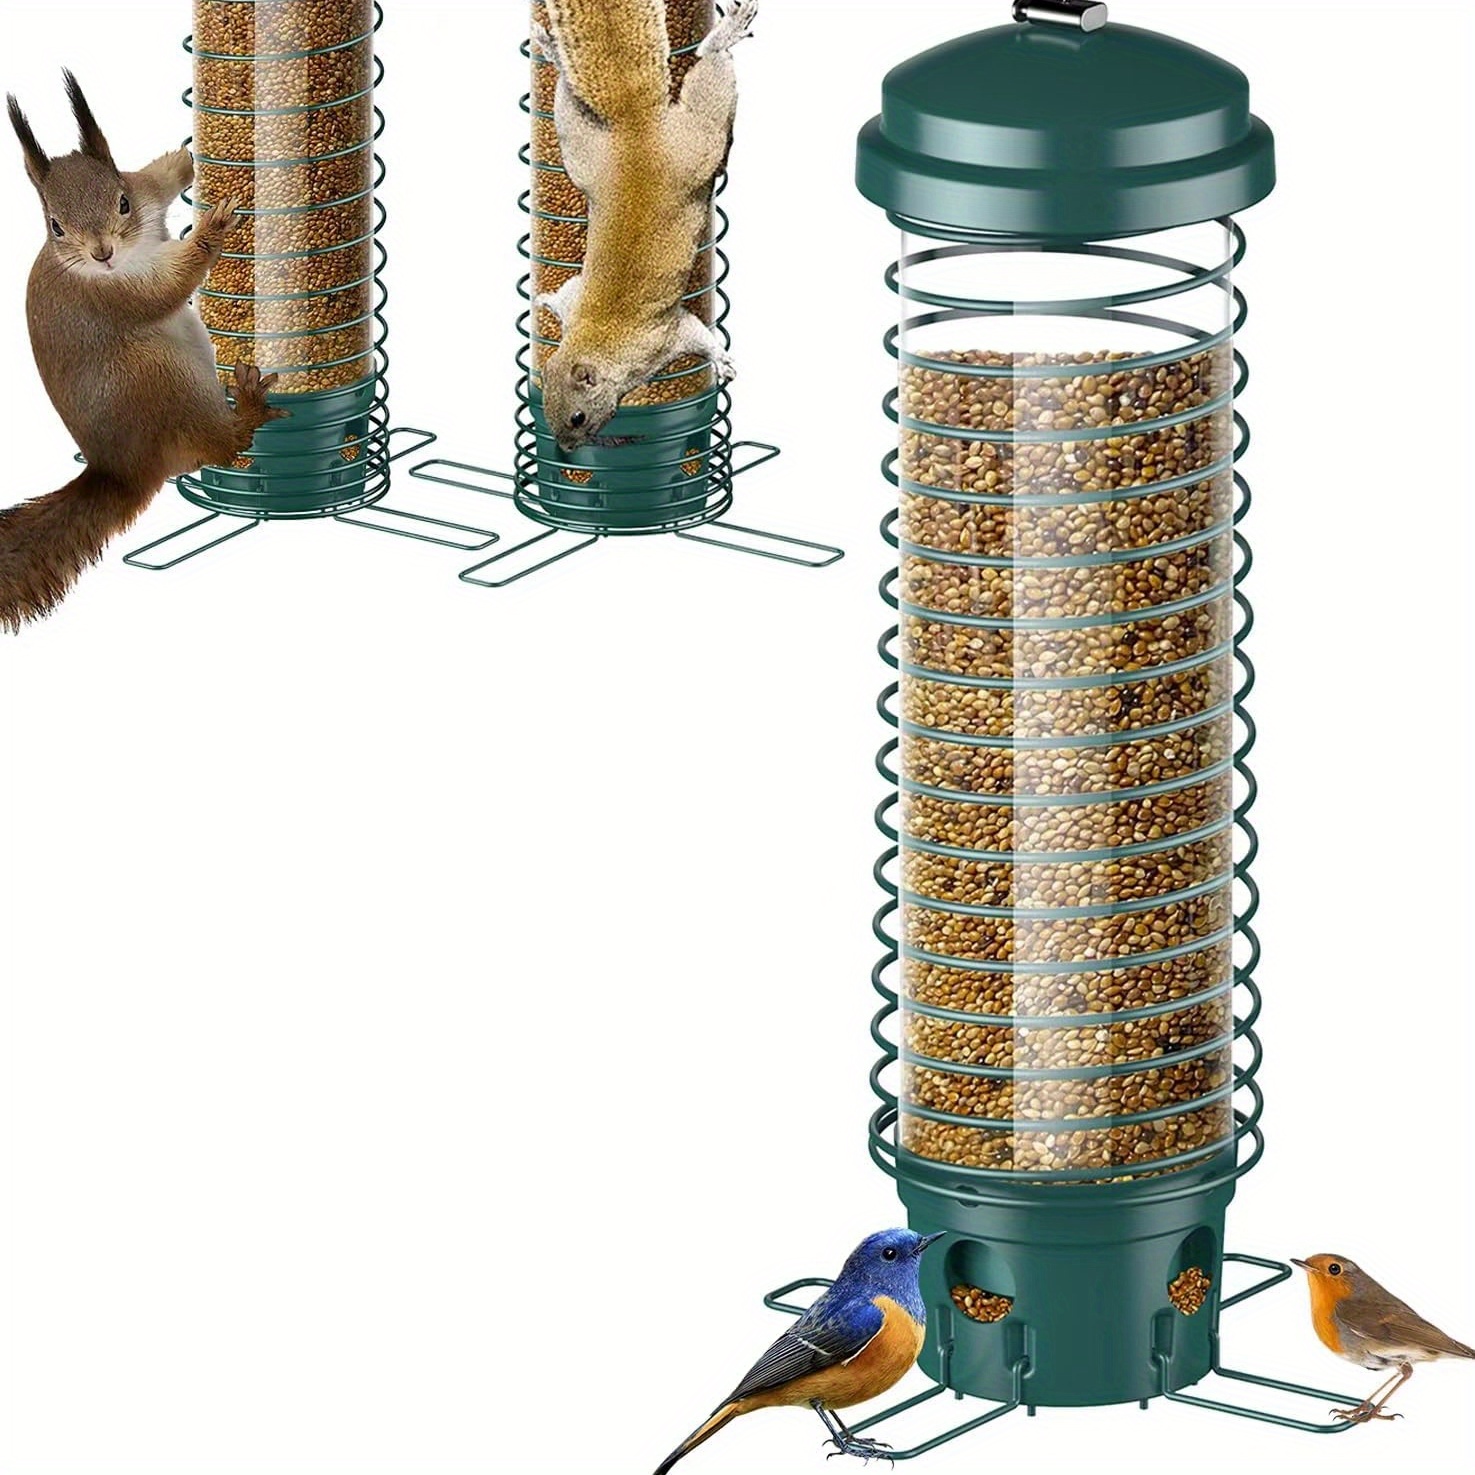 

Bird Feeder For Outside, Squirrel Proof Bird Feeders For Outdoors Hanging, Metal Wild Bird Seed Feeders For Bluebird, , Finch, Sparrow, , 4 Ports, Chew-proof, Weather-resistant